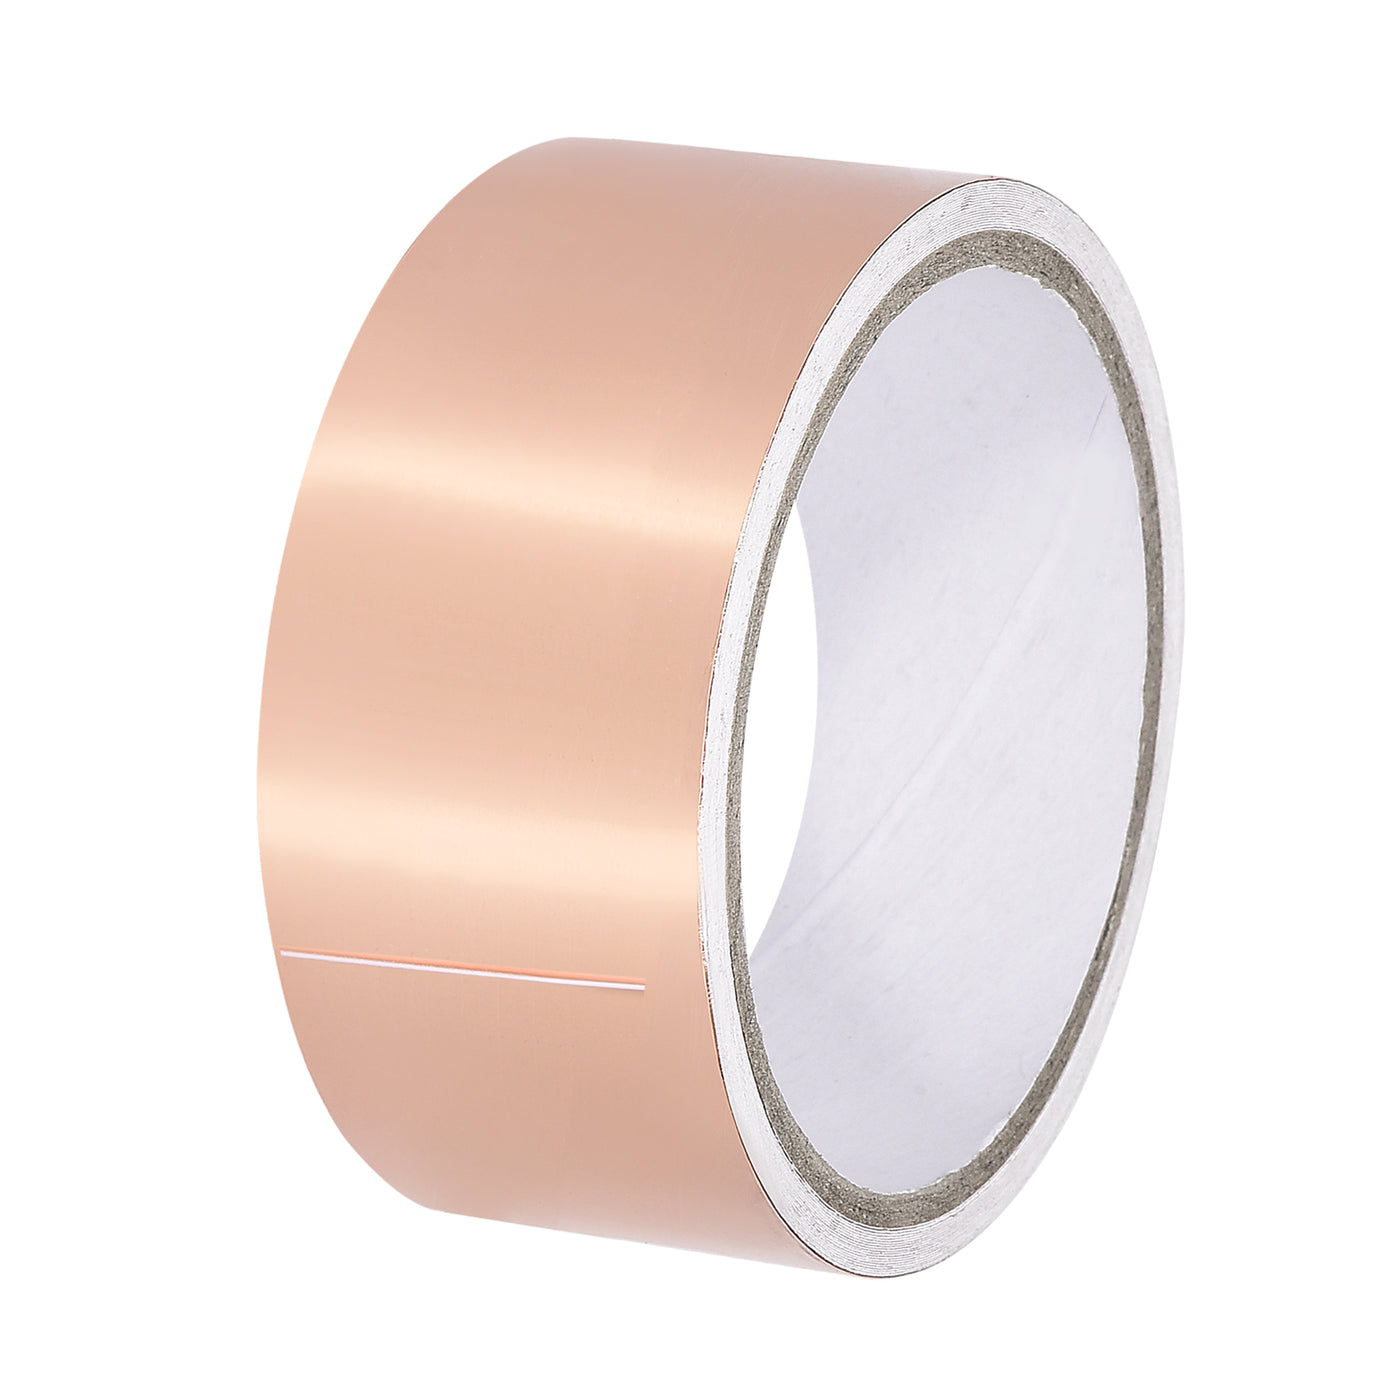 uxcell Uxcell Single-Sided Conductive Tape Copper Foil Tape 40mm x 5m/16.4ft for EMI Shielding 2pcs